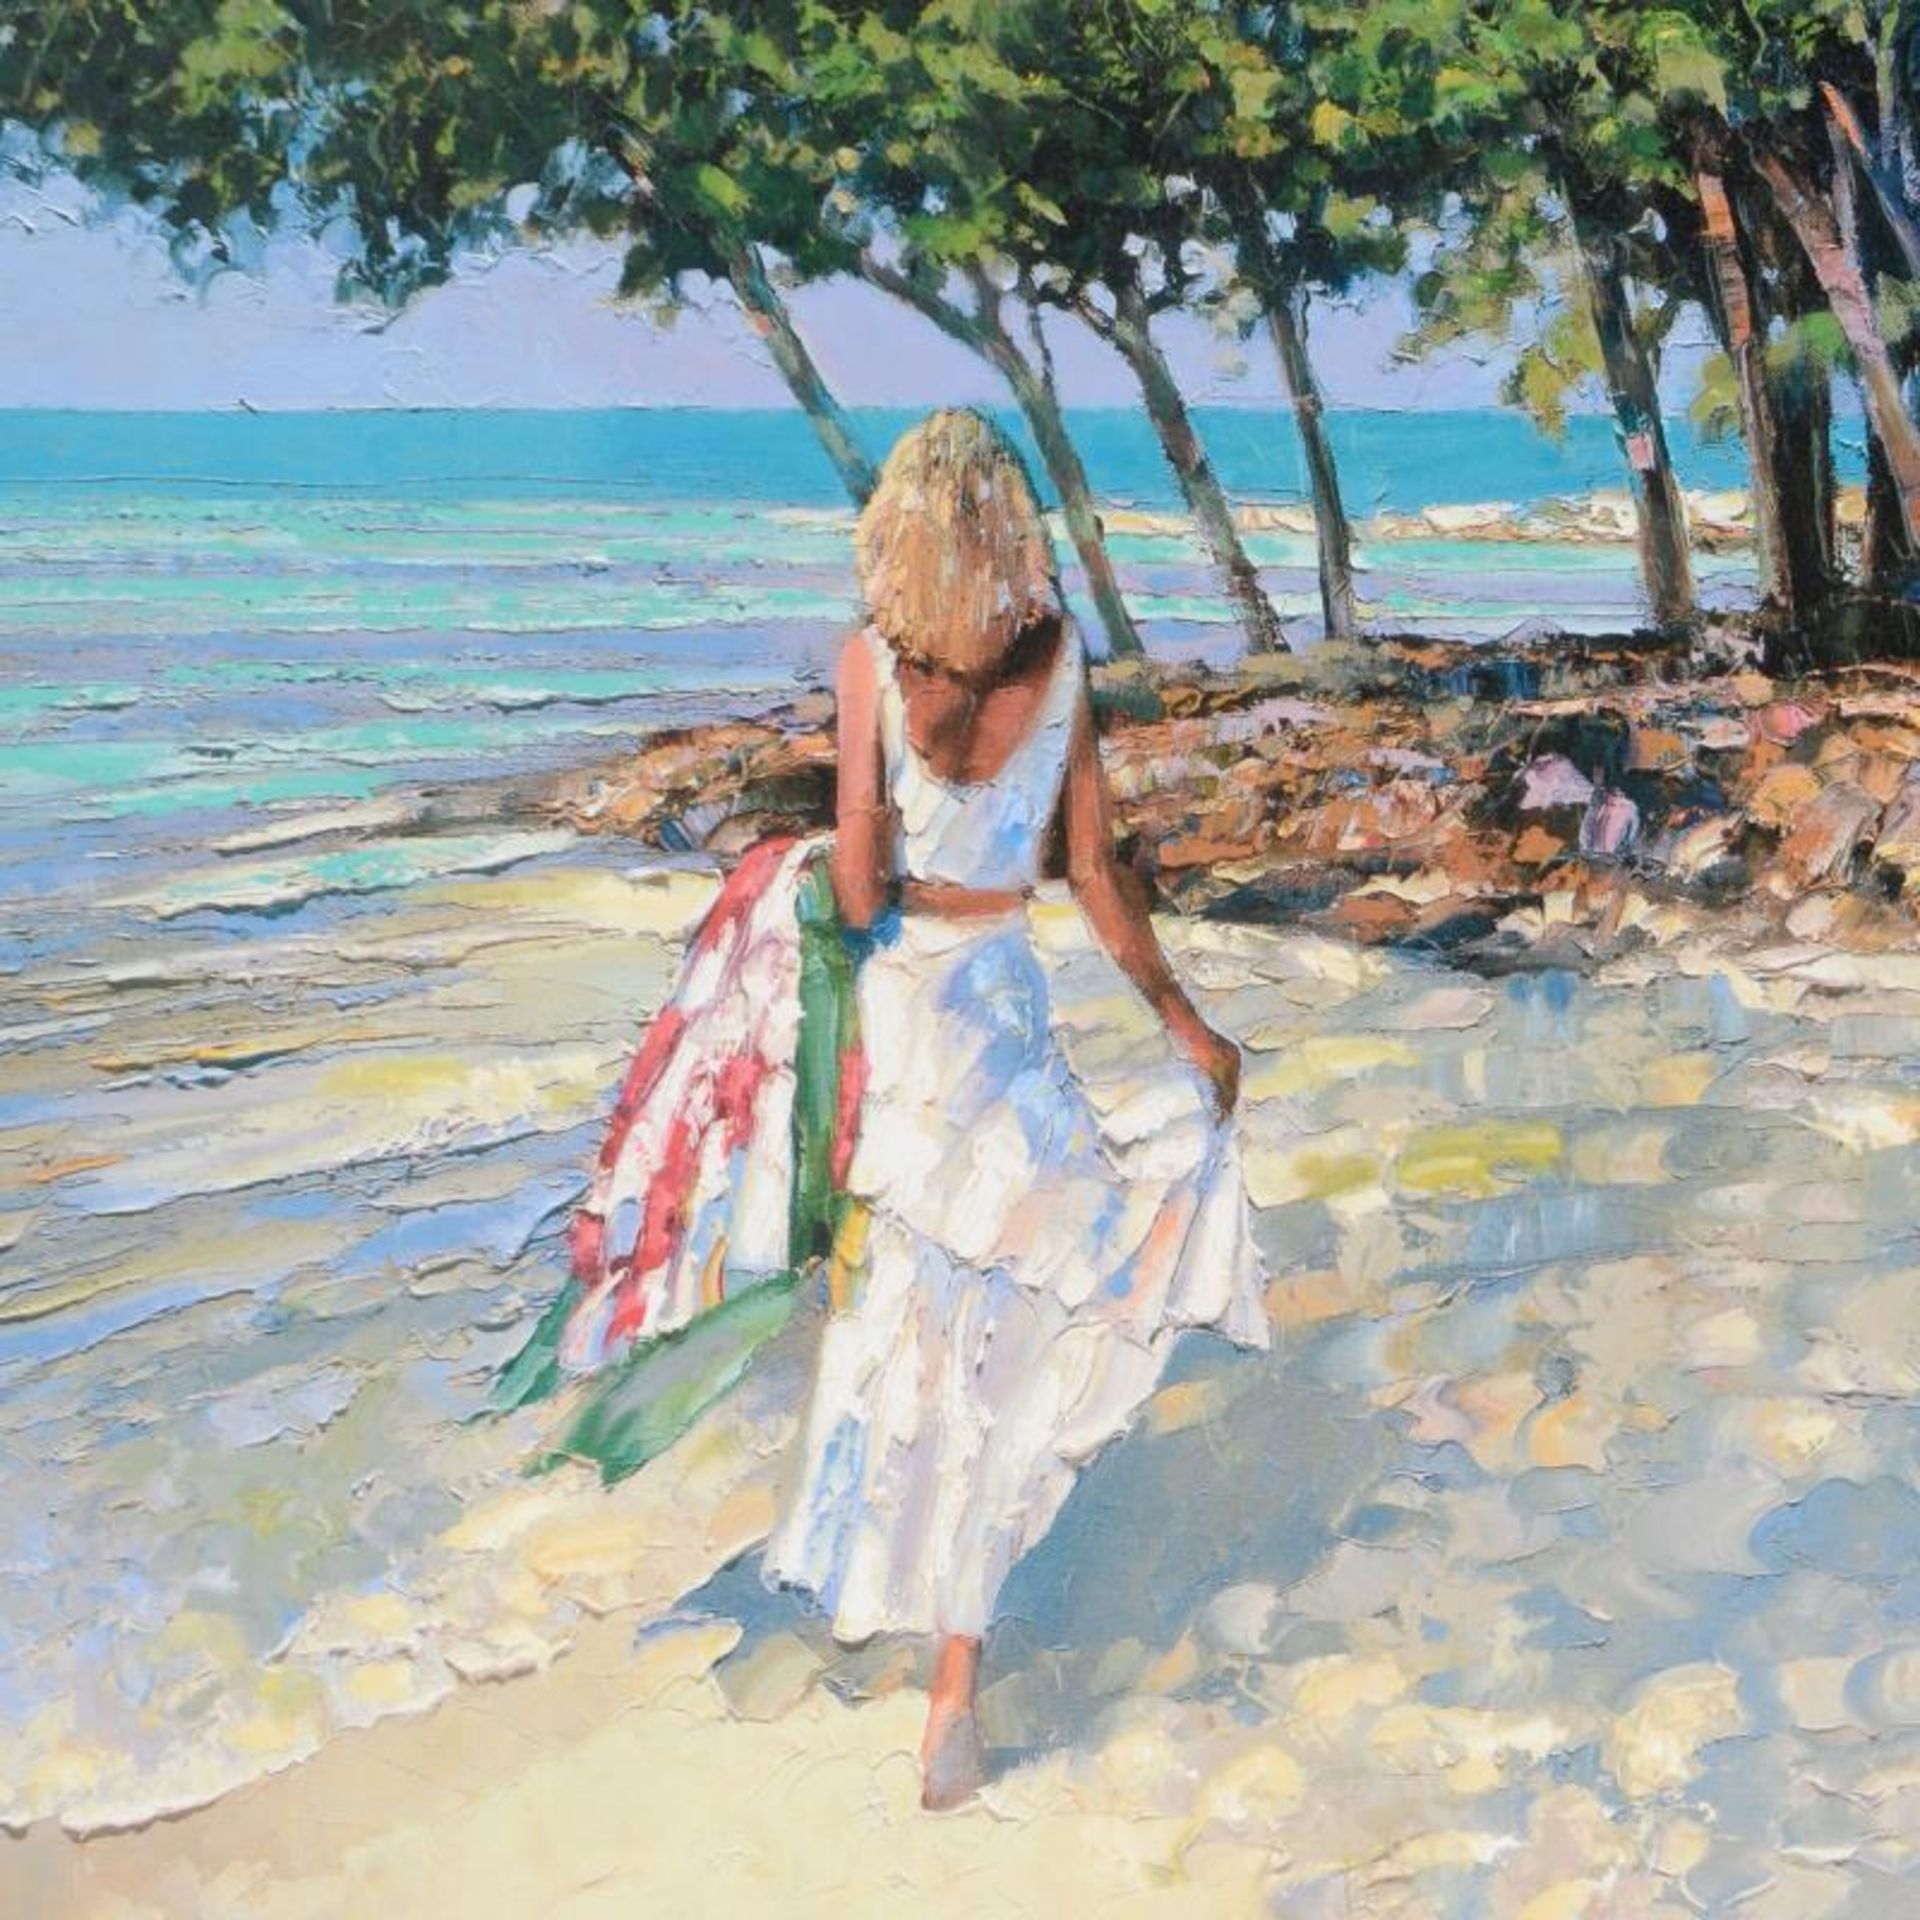 Howard Behrens (1933-2014), "My Beloved" Limited Edition on Canvas, Numbered and - Image 2 of 2